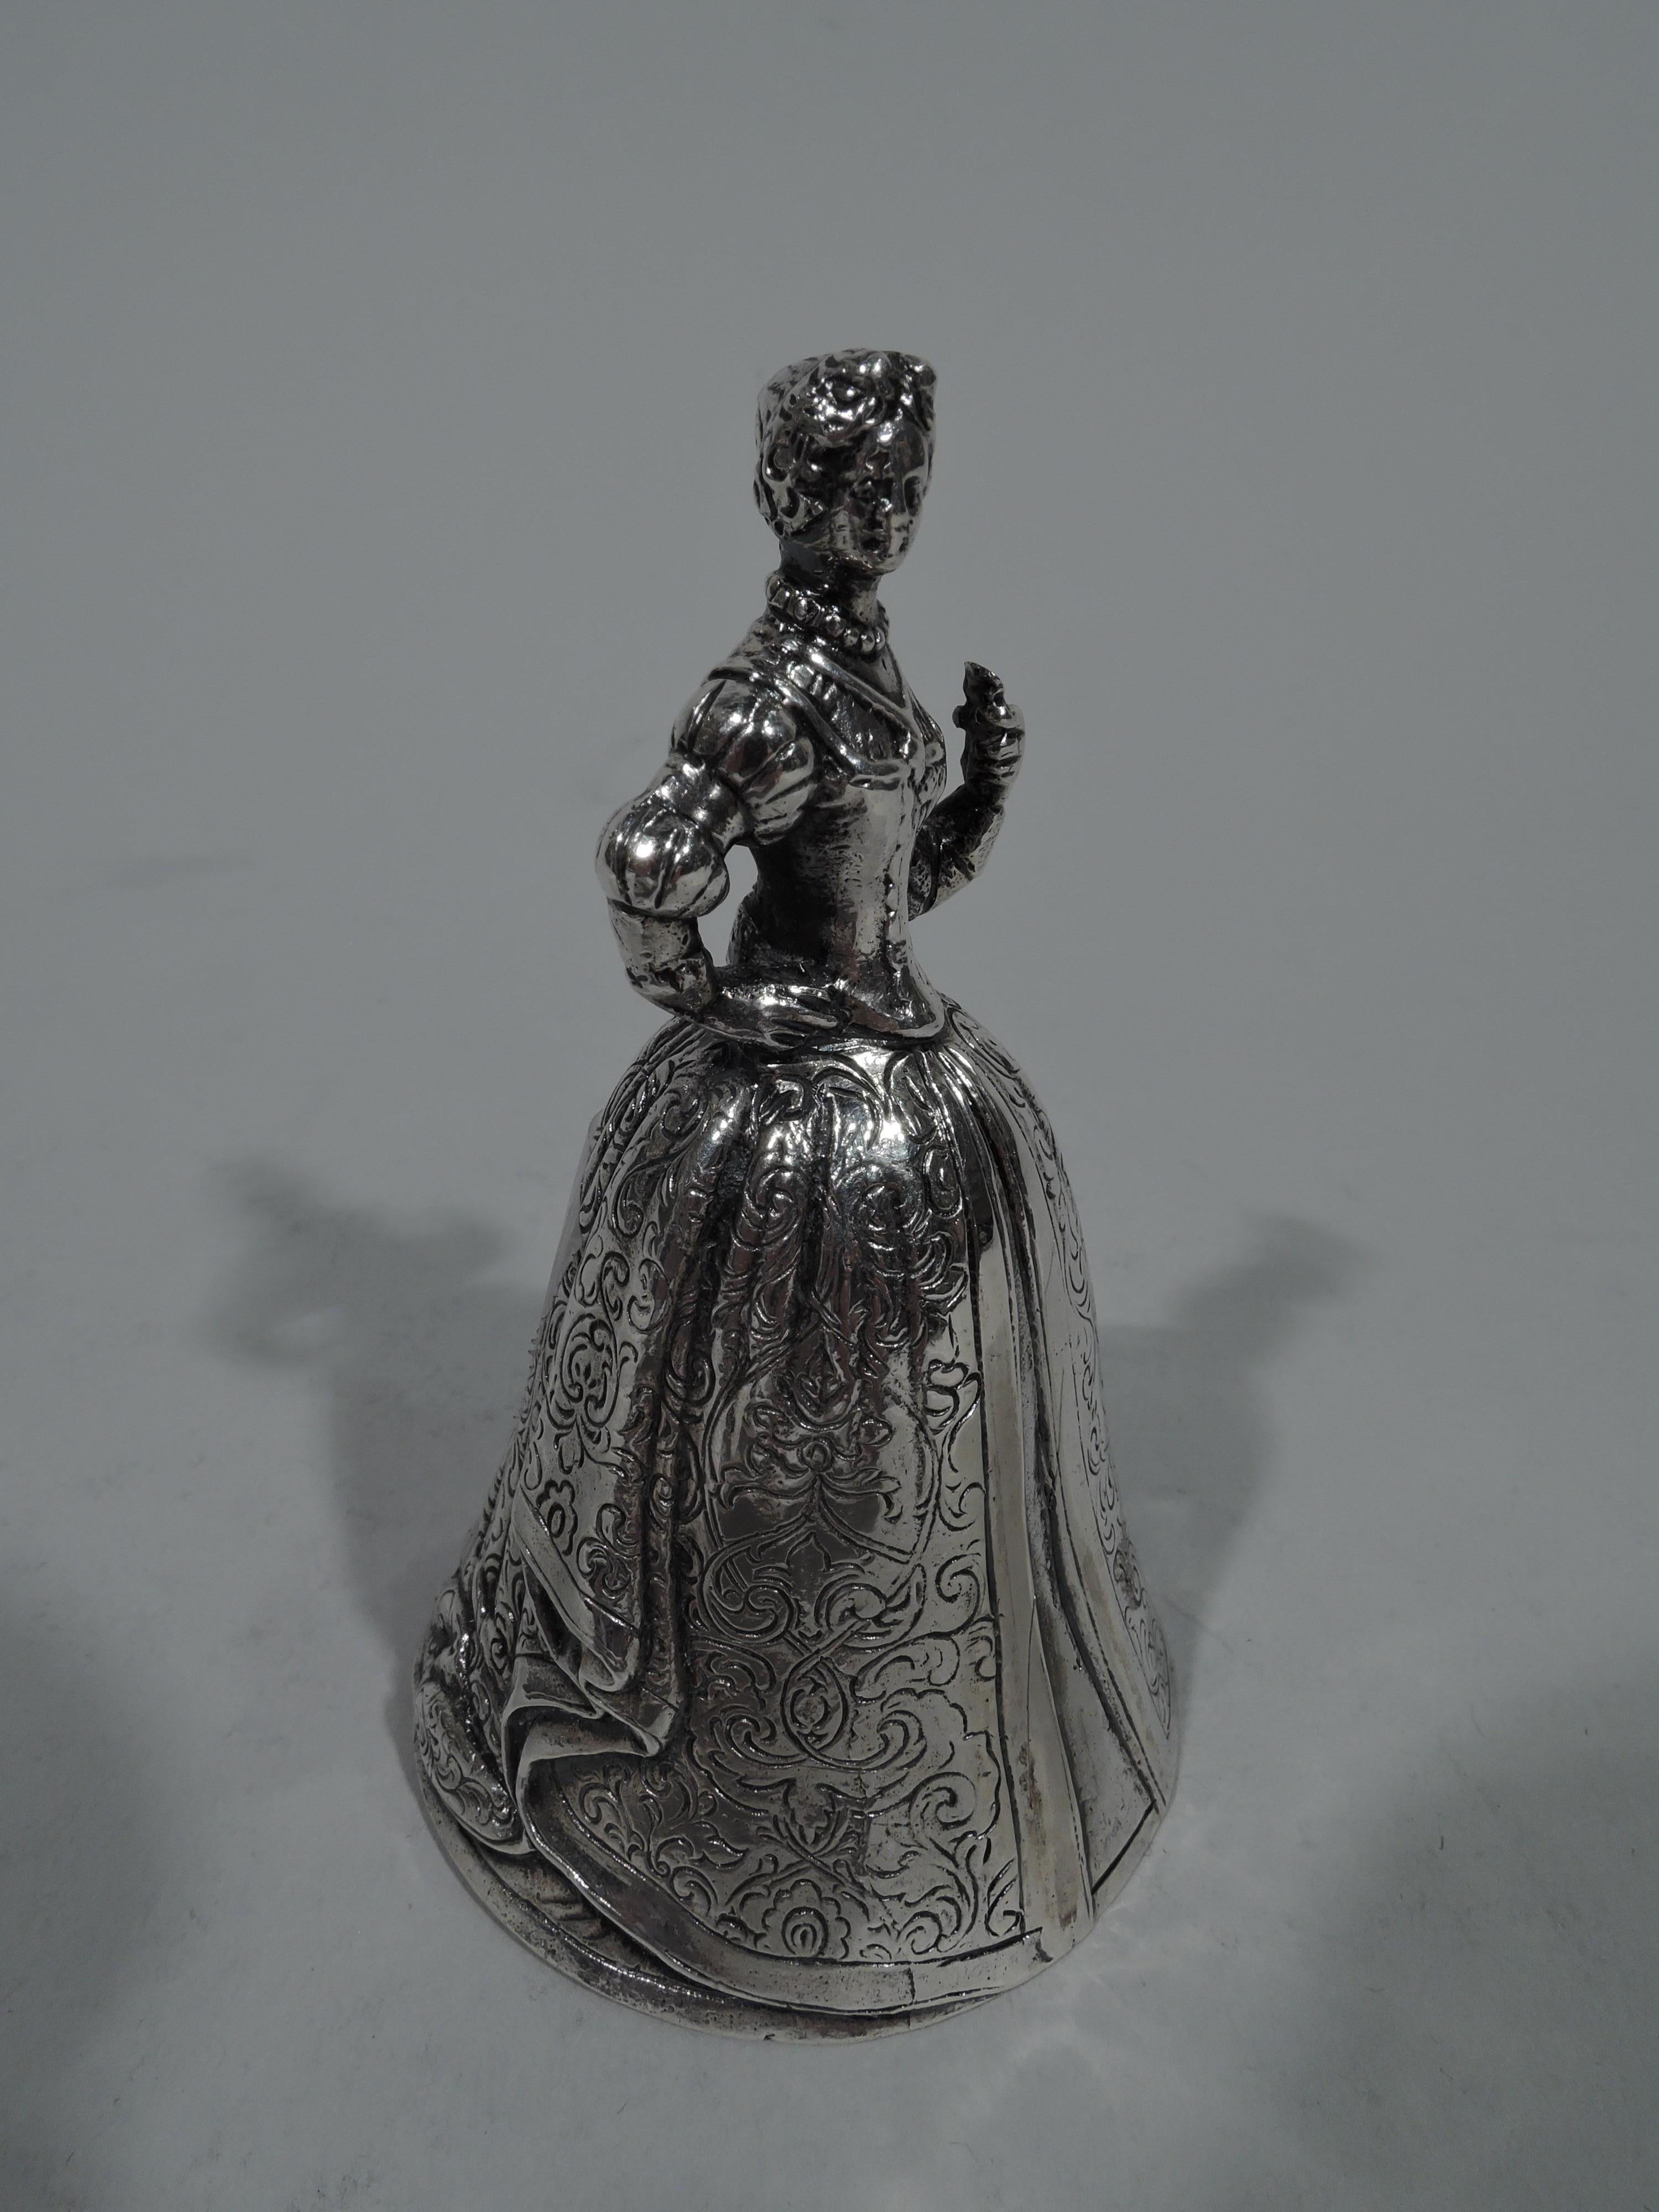 German sterling silver figural bell. Imported to England in 1907. An olden-days lady in a wide sweeping skirt with tooled pattern and snug bodice stands with one hand on hip. Clapper makes nice ring. A pretty belle bell. German marks and English